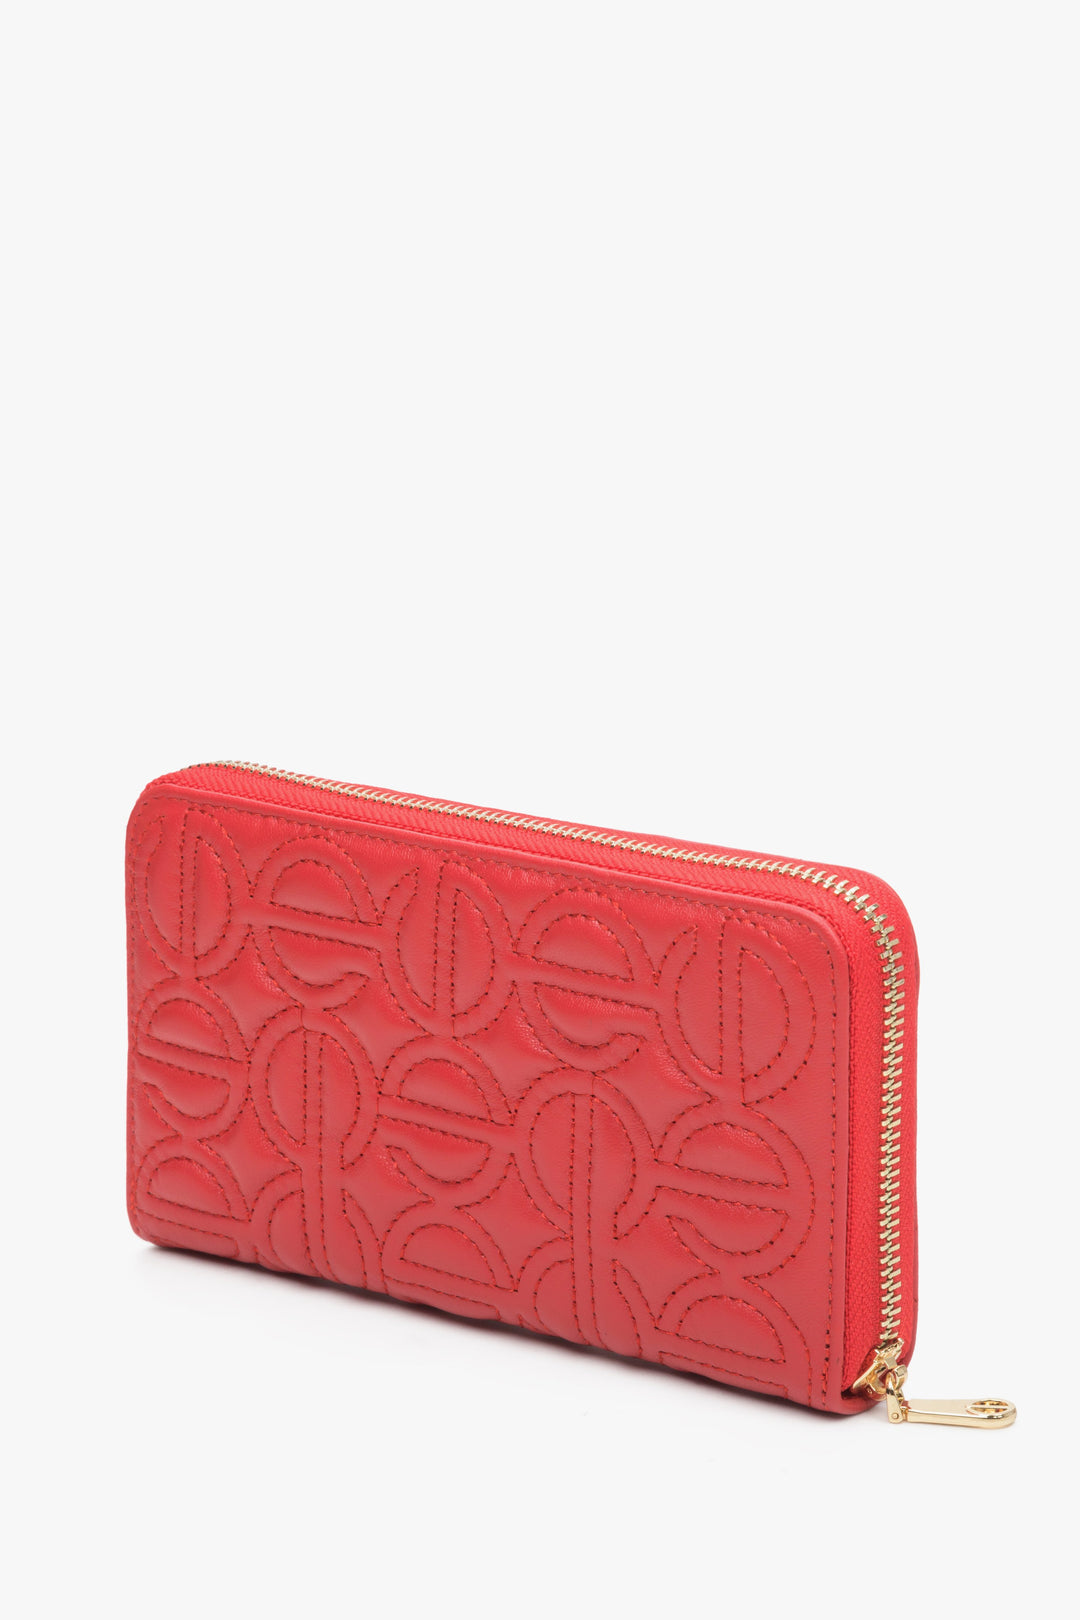 Large red women's continental wallet with a zipper by Estro.